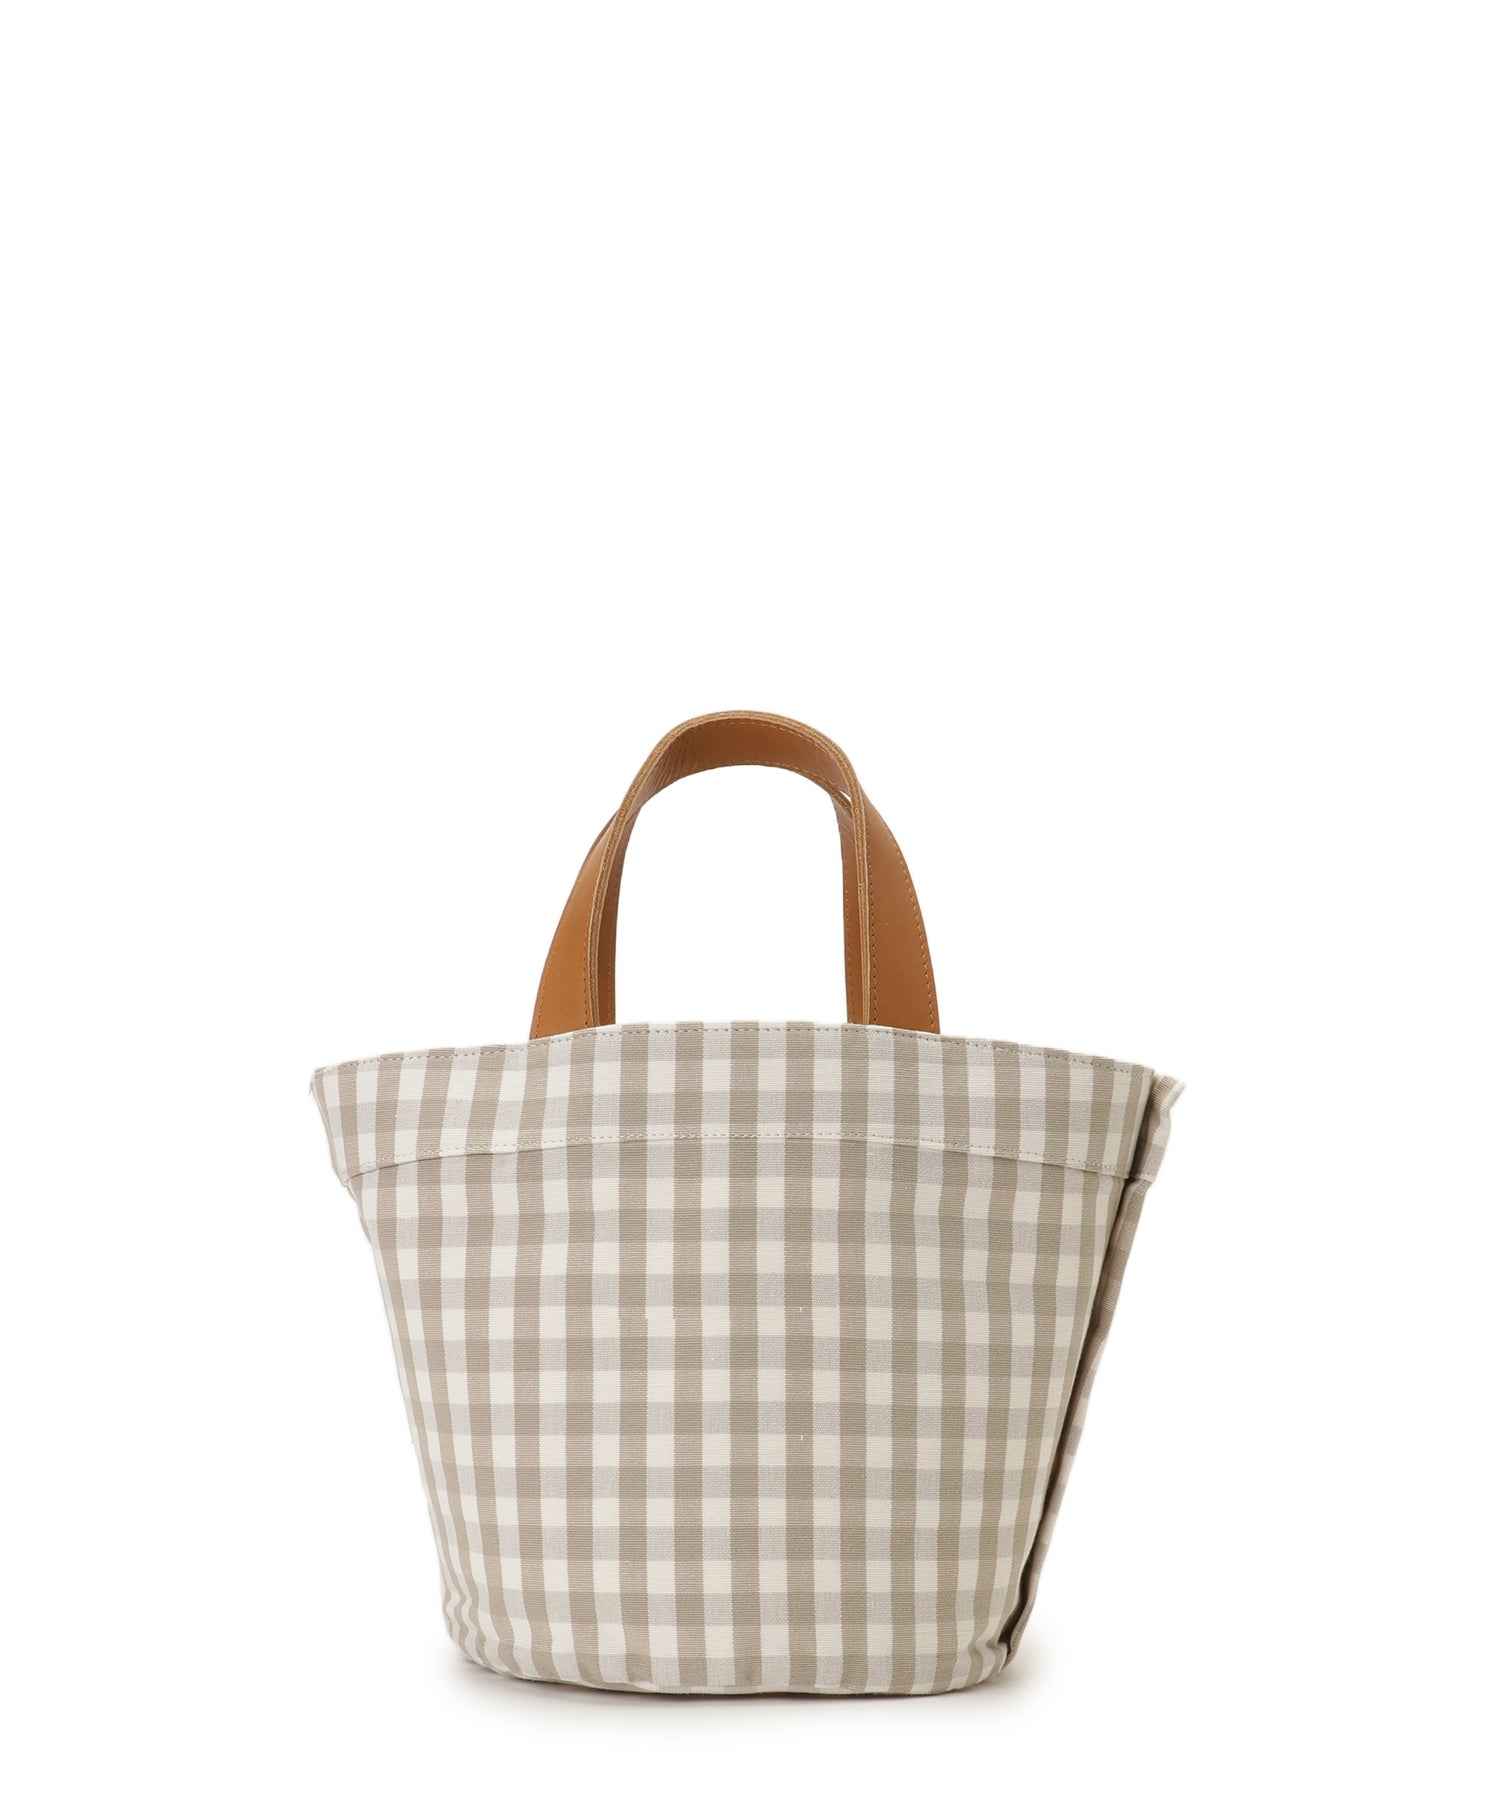 WEB限定] Gingham check tote S— LUDLOW STORE